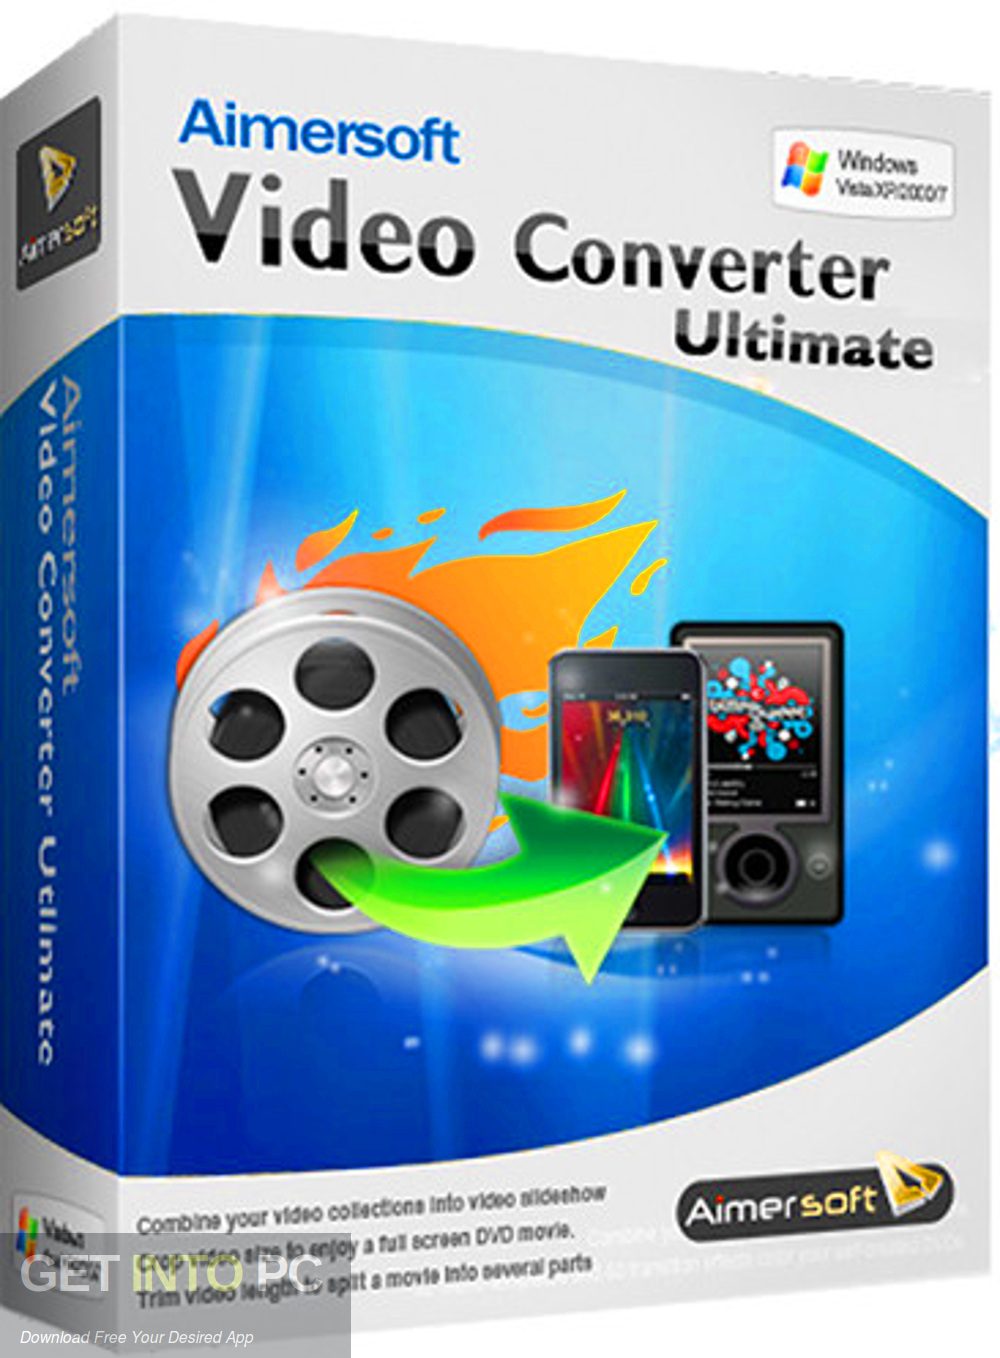 aimersoft-video-converter-ultimate-free-download-getintopc-com_-3090158